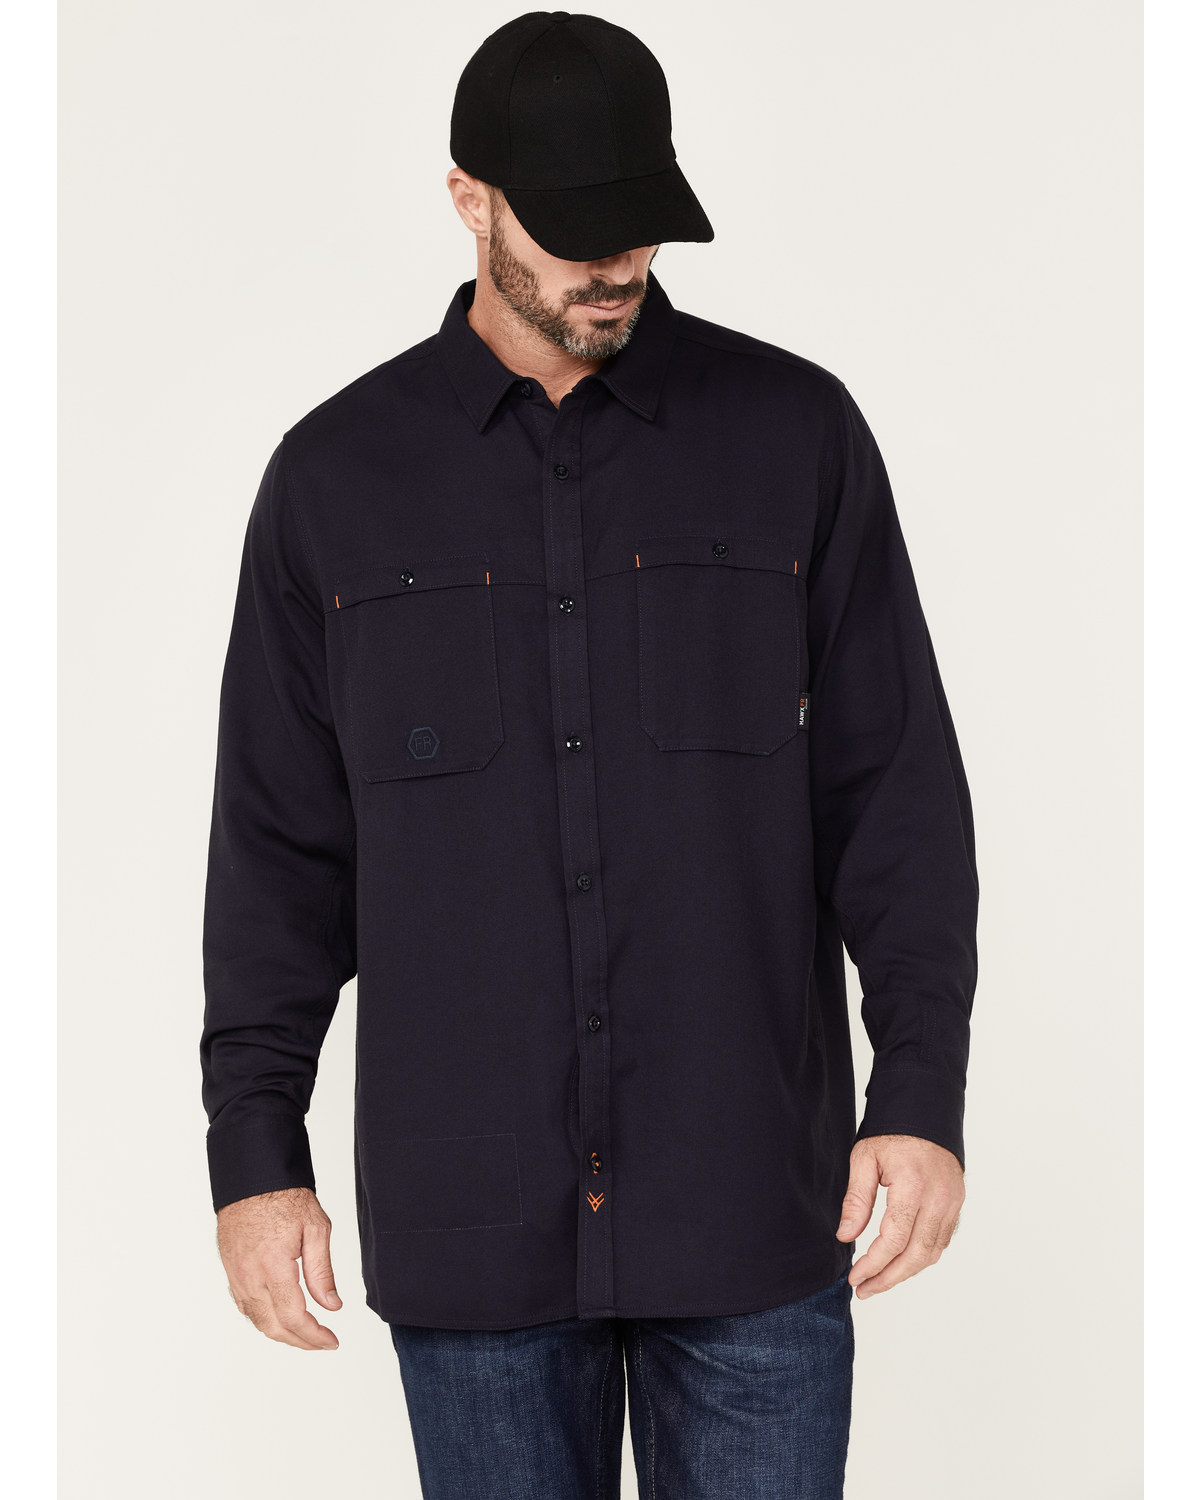 Hawx Men's FR Vented Solid Long Sleeve Button-Down Work Shirt